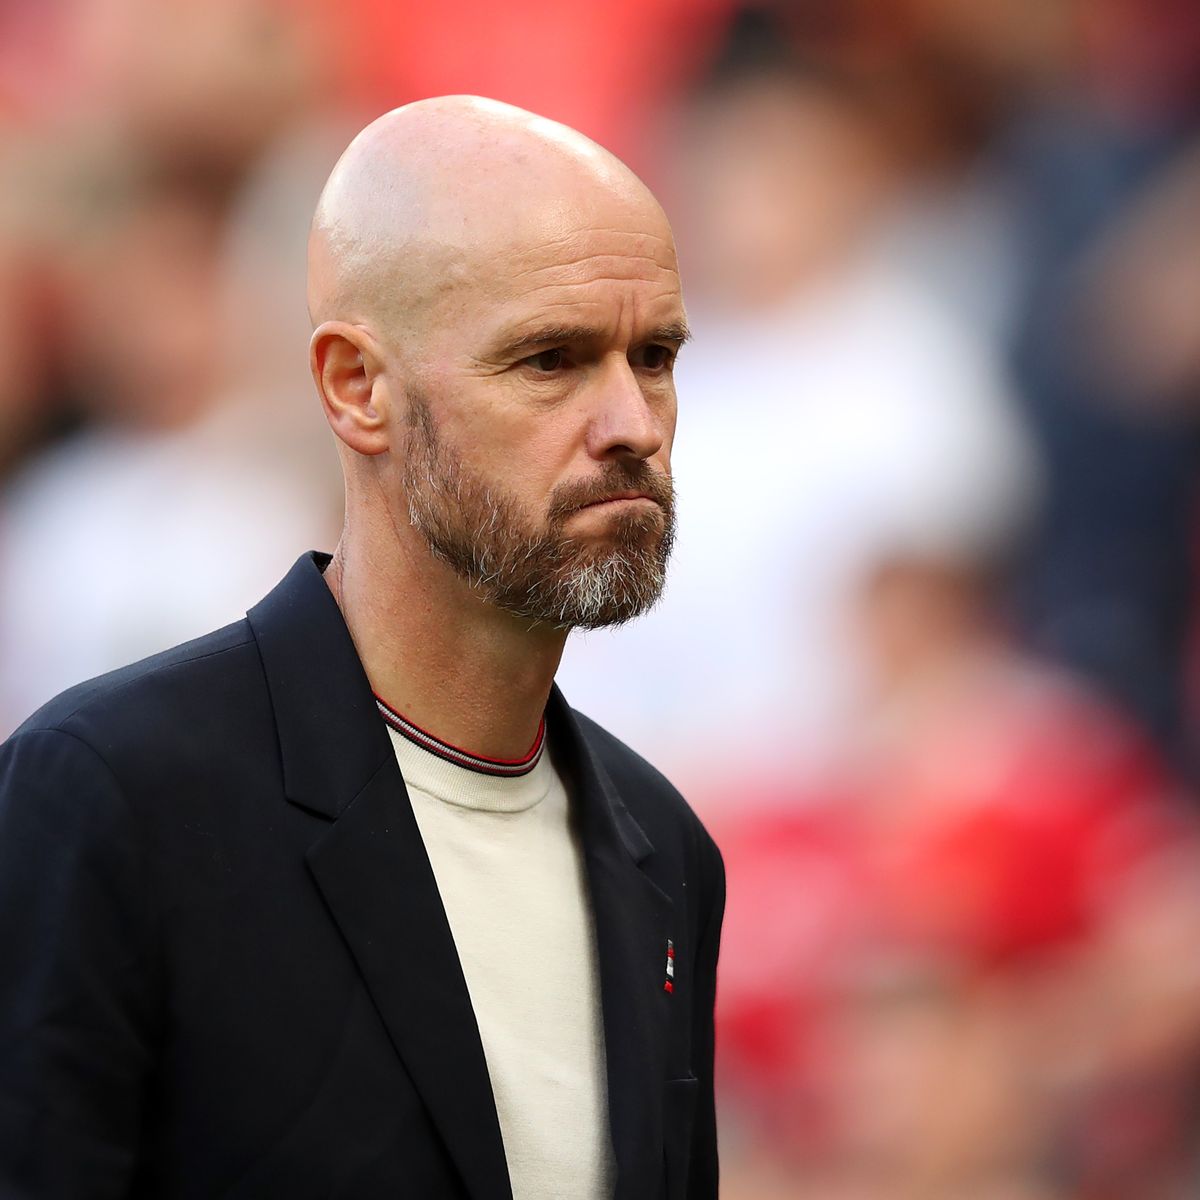 Erik ten Hag walks into a bank to cash a cheque. As he approaches the cashier he says, 'Good morning, could you please cash this cheque for me?' Cashier:'It would be my pleasure. Could you please show me your ID?' Ten Hag:'Truthfully, I did not bring my ID with me as I didn't…